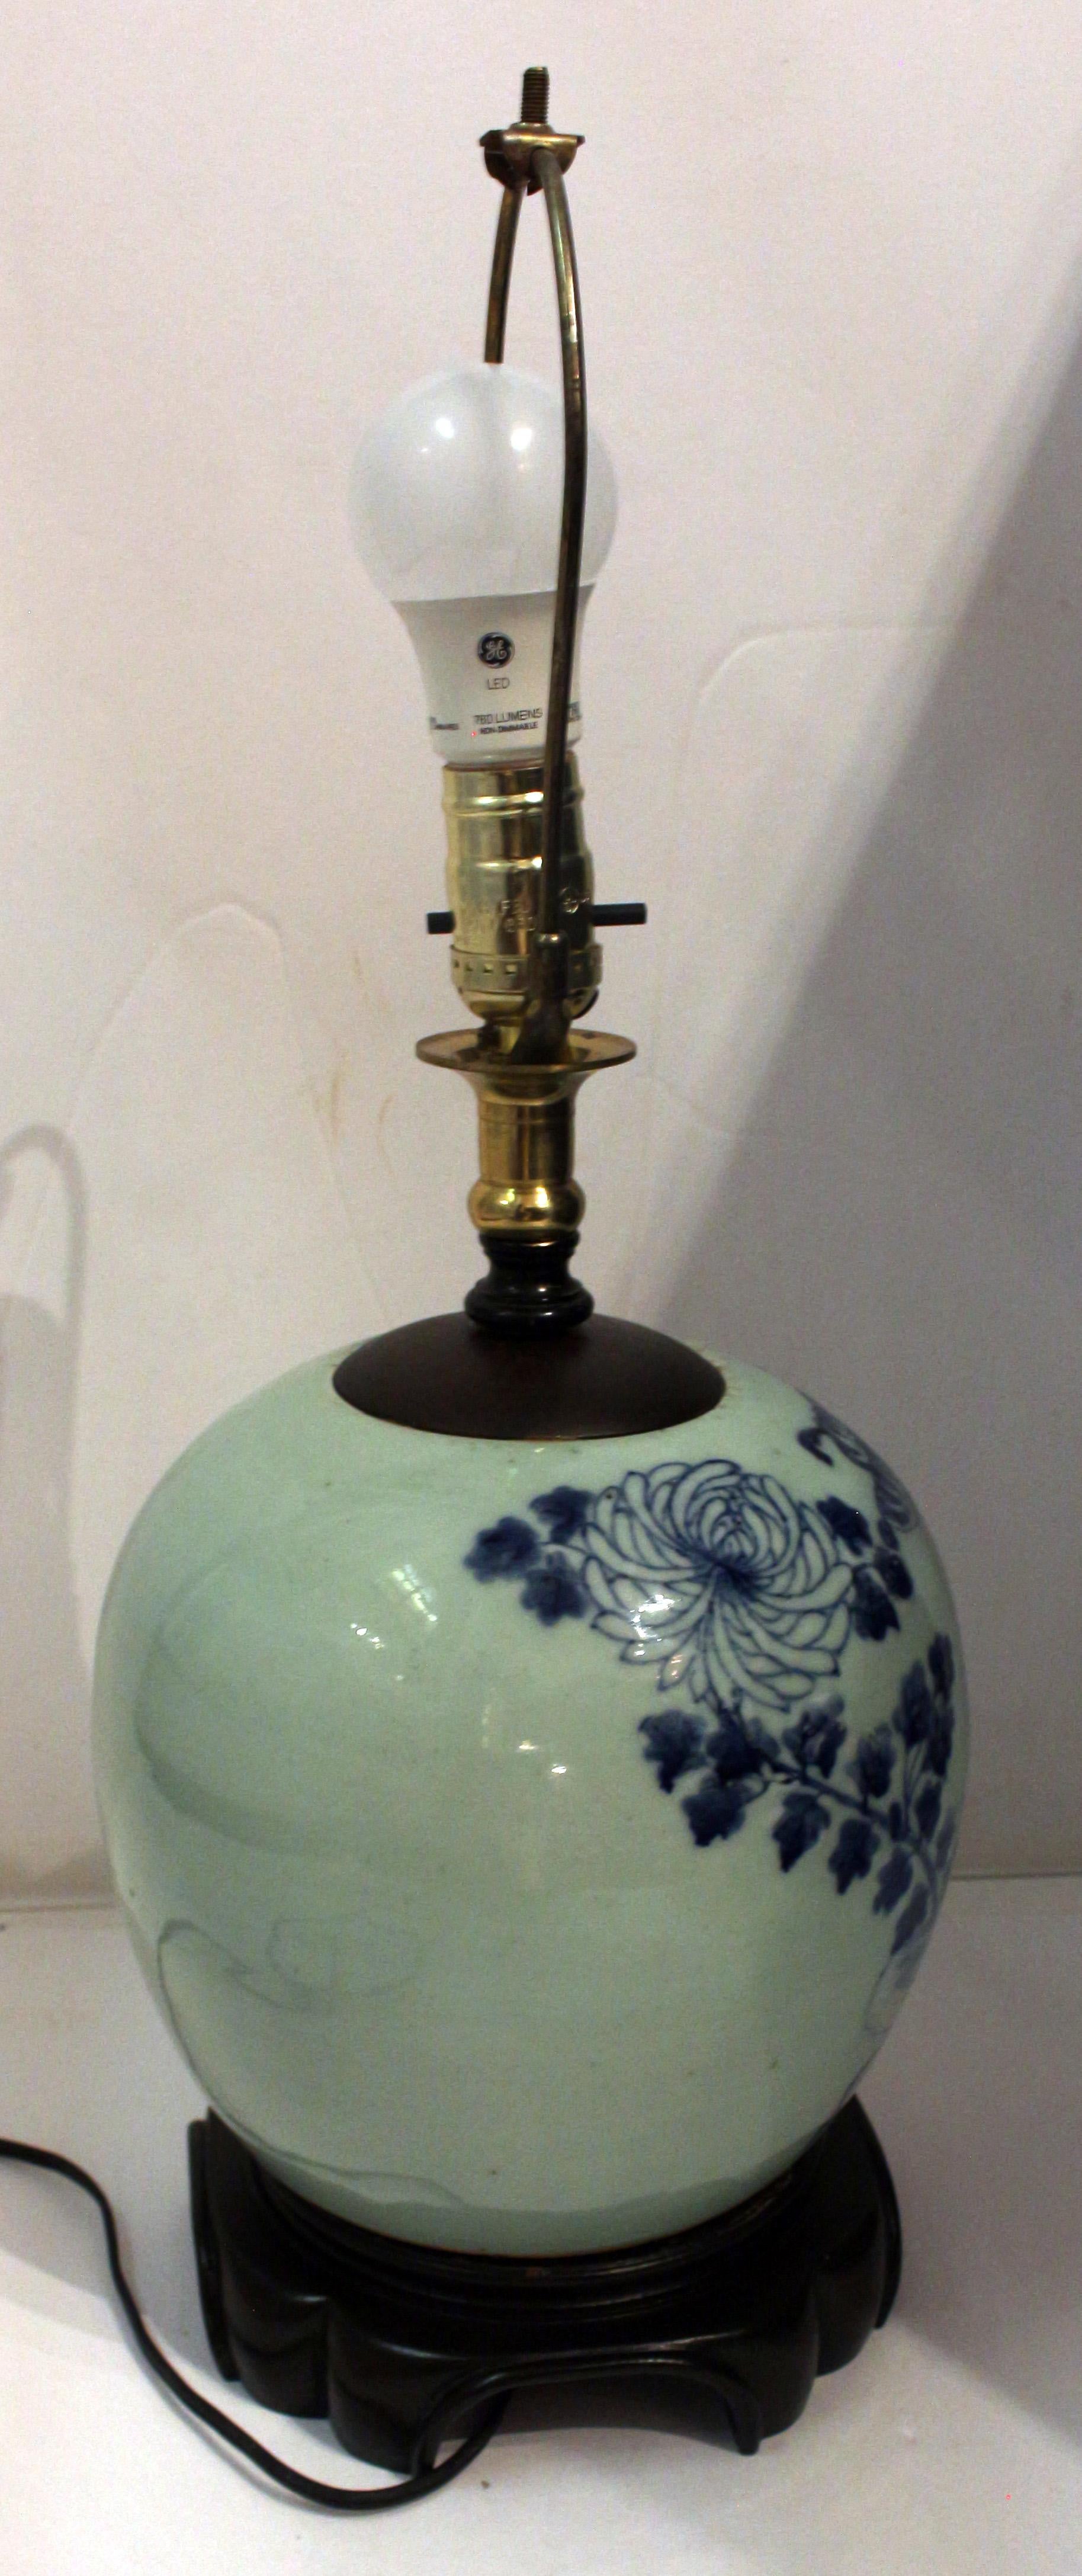 Late 19th century ginger jar now mounted as a lamp, Chinese. Qing Dynasty; blue & white on celadon. Fine carved base. Moth & butterfly among large chrysanthemums.
16.5